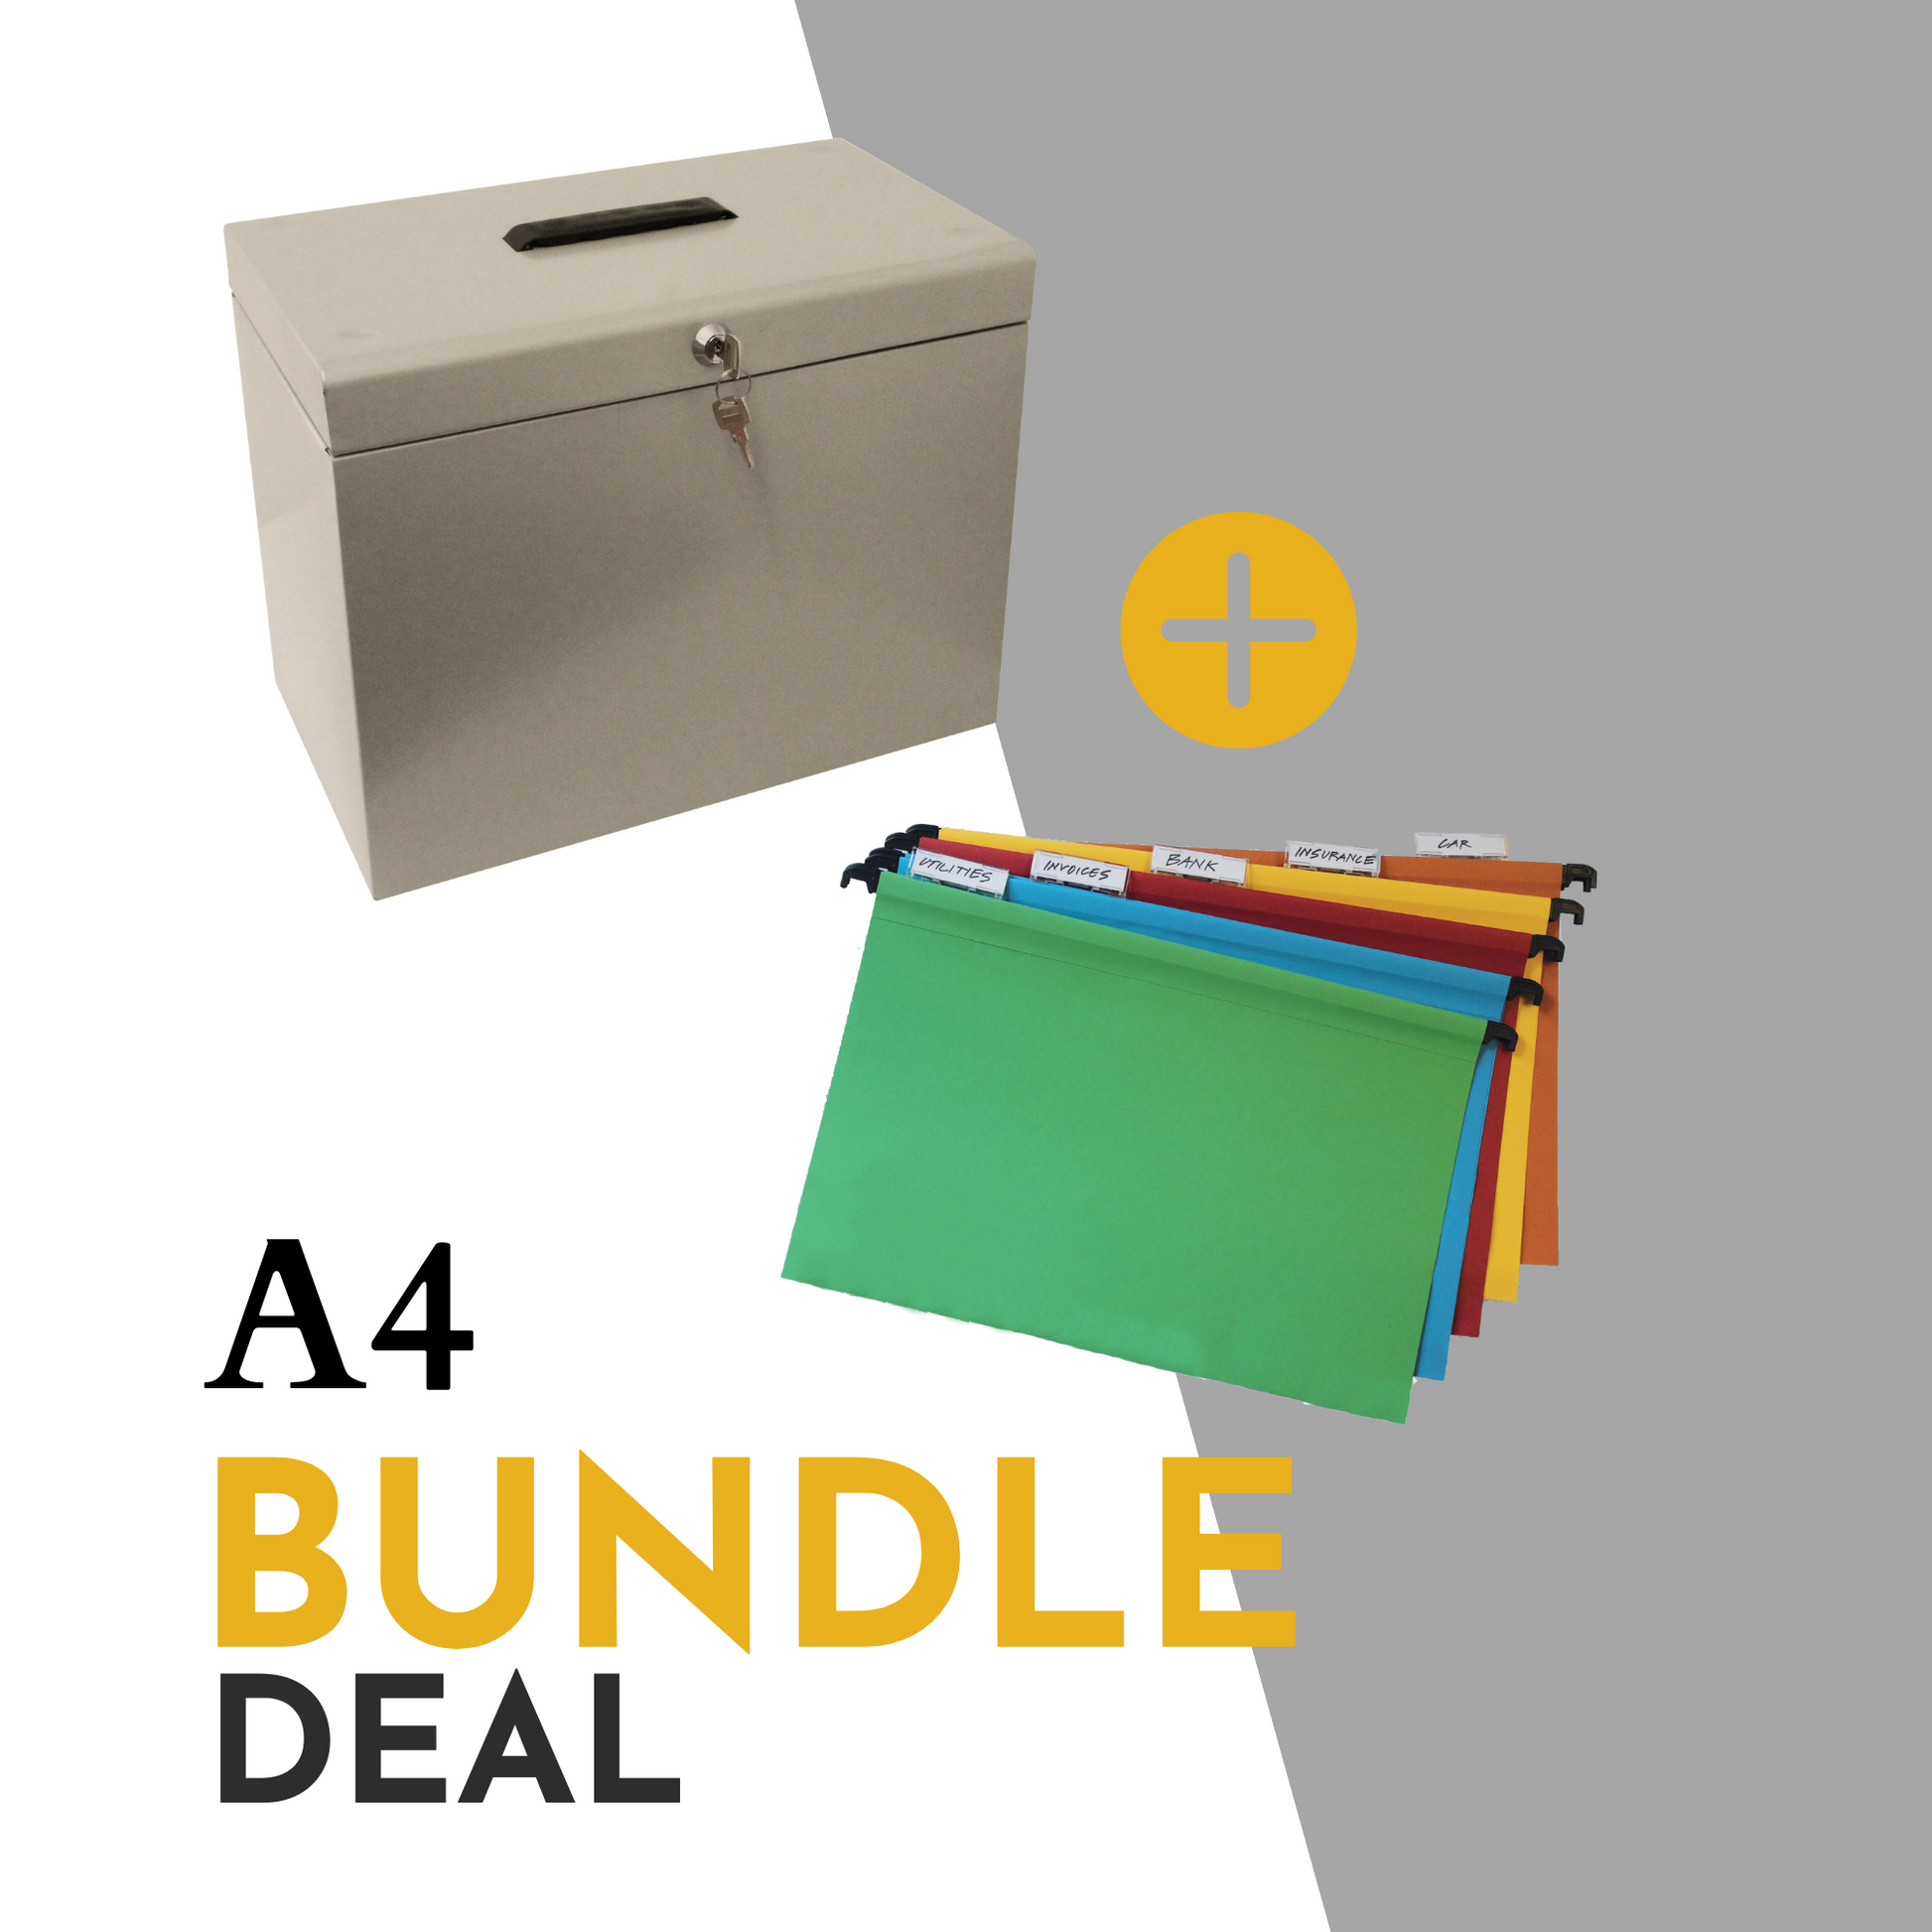 Promotional image for an A4 file storage bundle deal, including a silver grey file box with a handle and key lock, plus an additional set of 10 assorted color A4 suspension files with index tabs, showcasing an organized filing solution.